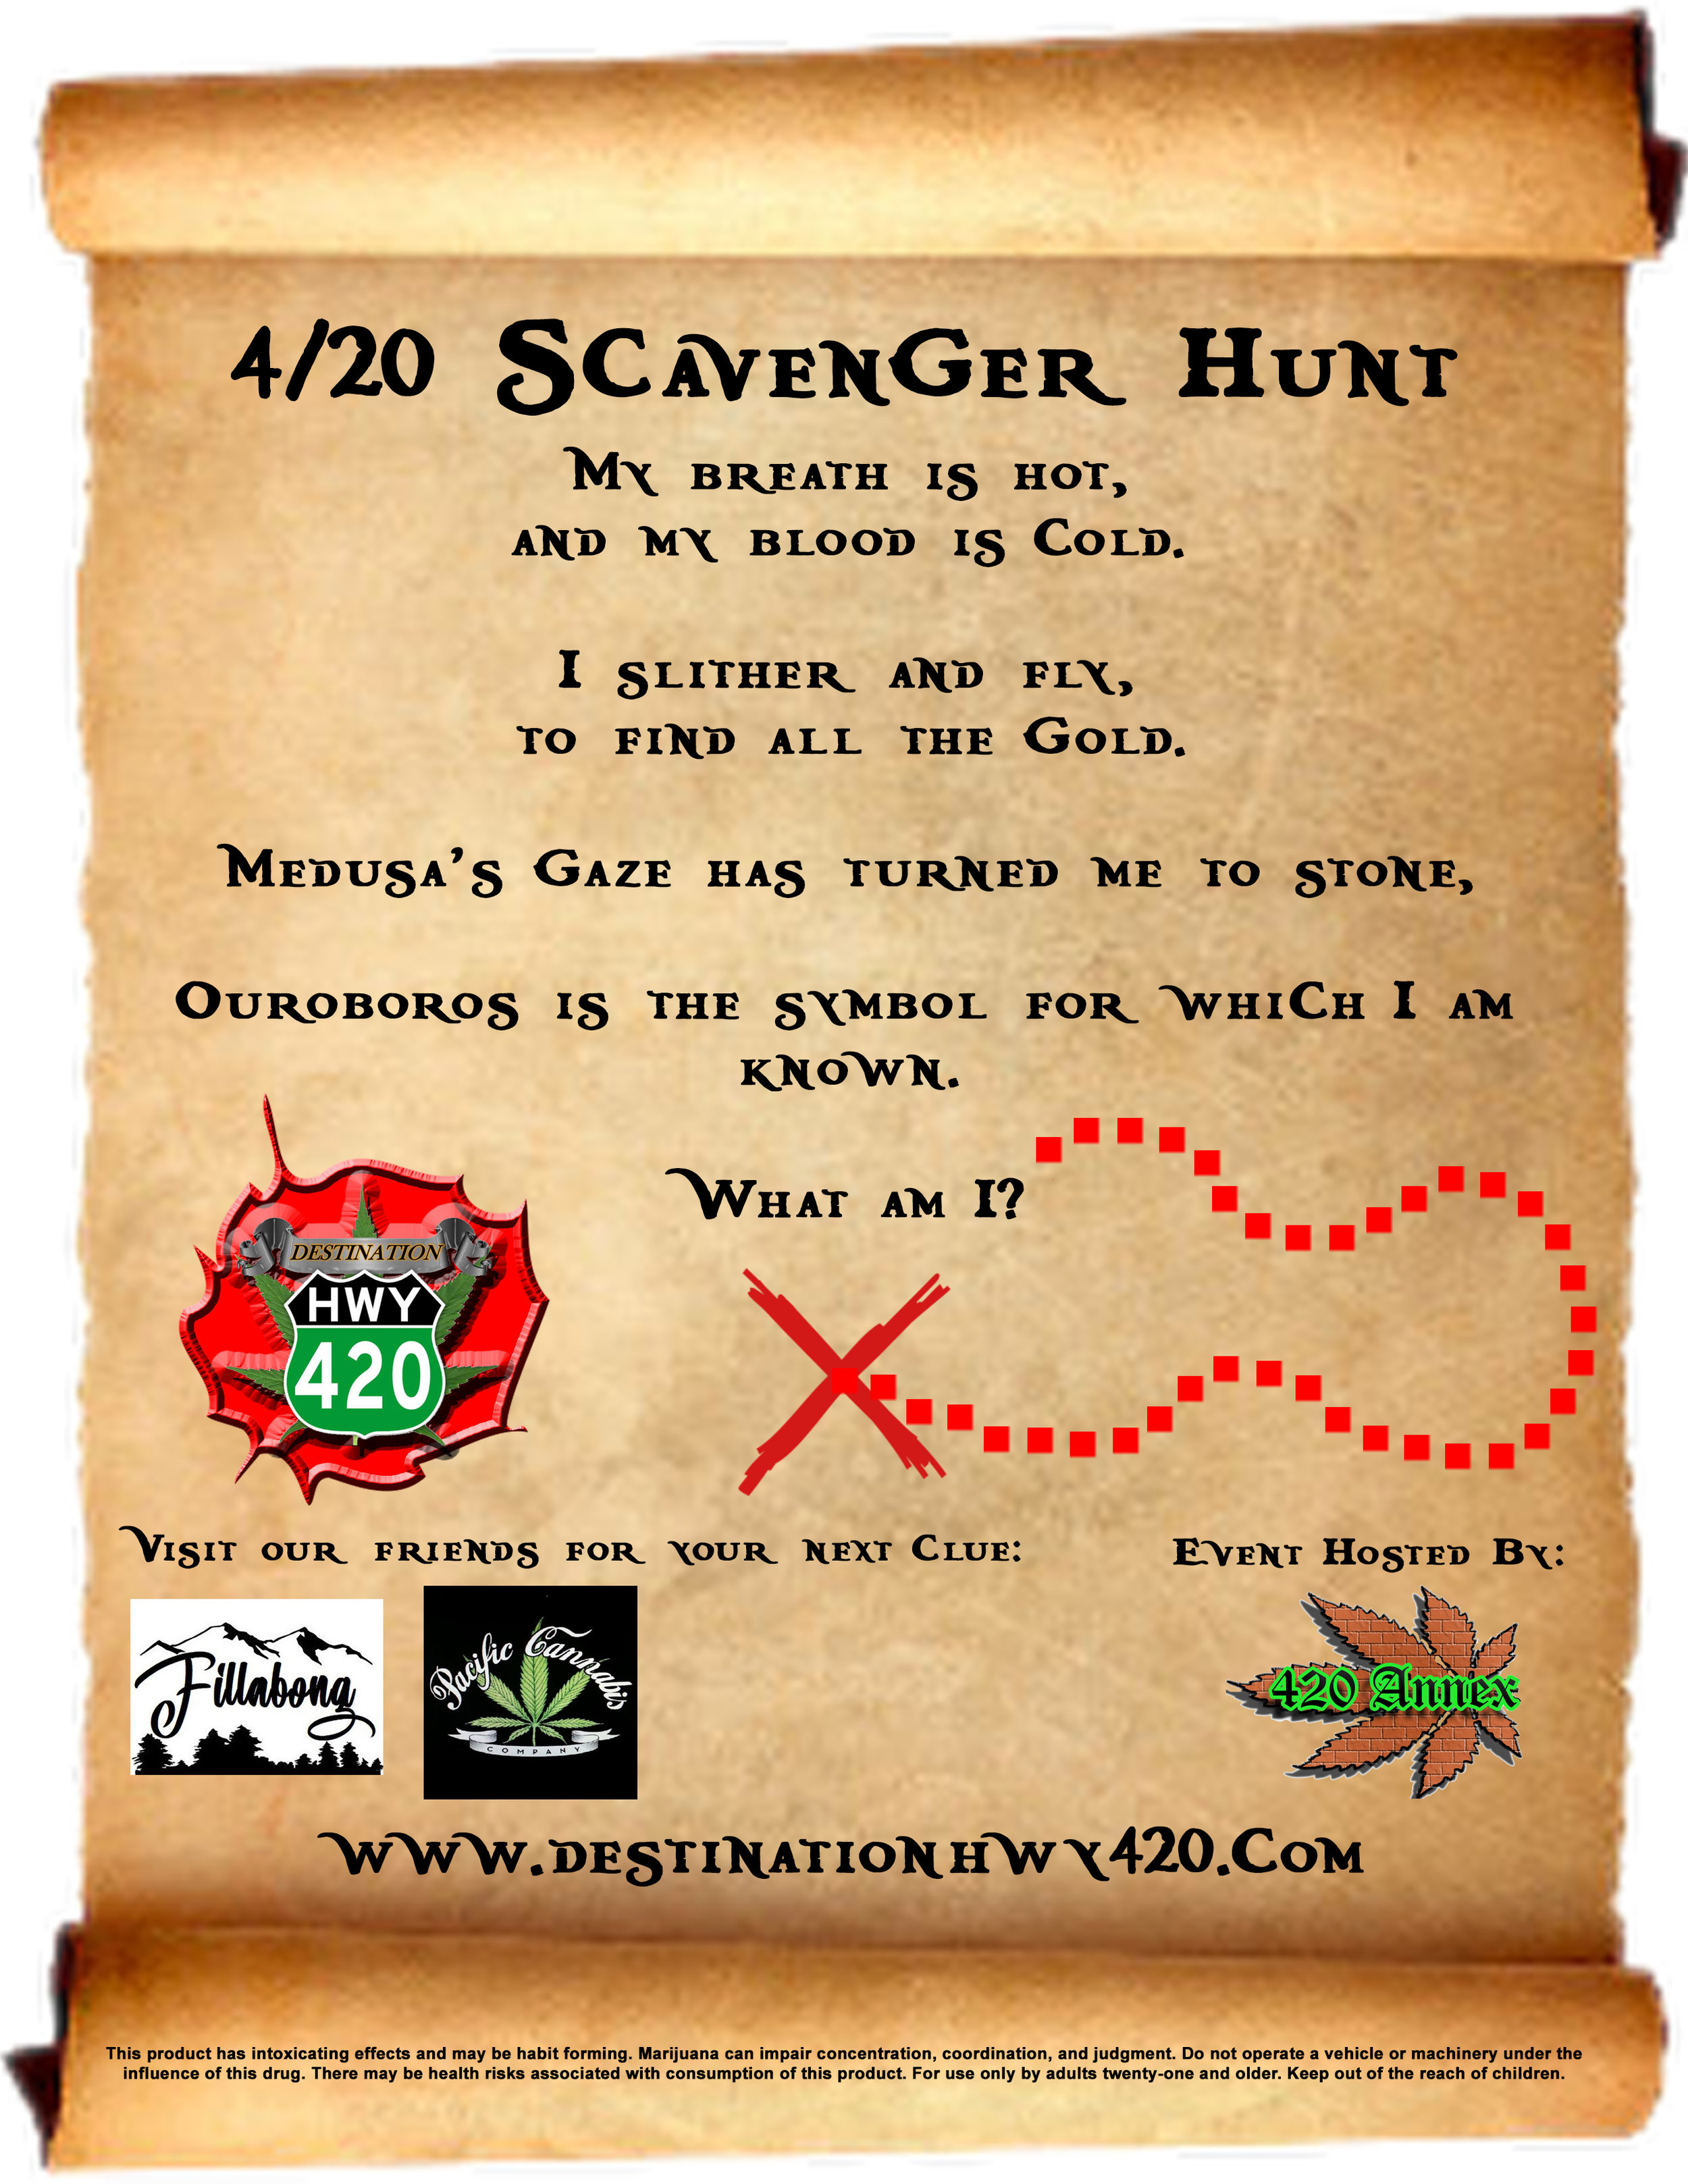 This is an example riddle from Destination HWY 420 for the 4/20 Scavenger Hunt. Fillabong Bremerton, Pacific Cannabis Company, and Destination HWY 420 are all participating in the 2019 4/20 Scavenger Hunt. To participate, stop by one of these marijuana retail stores, pick up a passport card, and solve each store’s riddle. Once you’ve completed your passport card, bring it with you to the 4/20 Fair for a chance to win some incredible 420 Annex gift baskets!